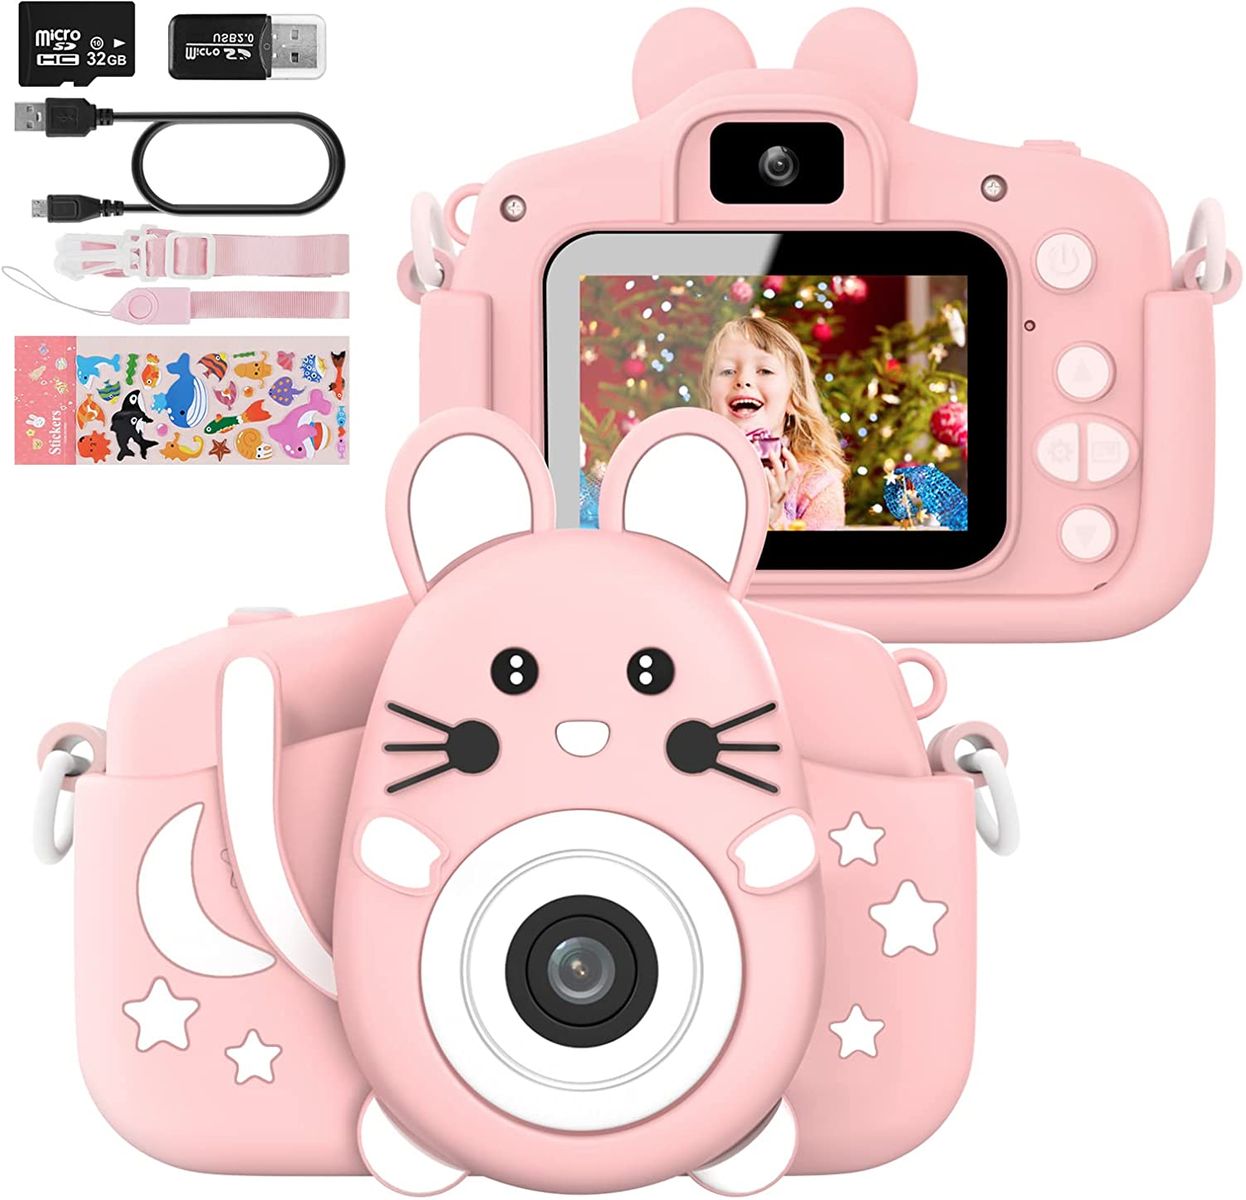 Kids Camera with Silicone Case, 20.0MP Rechargeable Kids Digital Dual Camera with 2.0 Inch IPS Screen 1080P Video Camcorder, 32GB SD Card, Selfie Childrens Camera Toy for Boys & Girls Age 3-12, Pink A-Pink